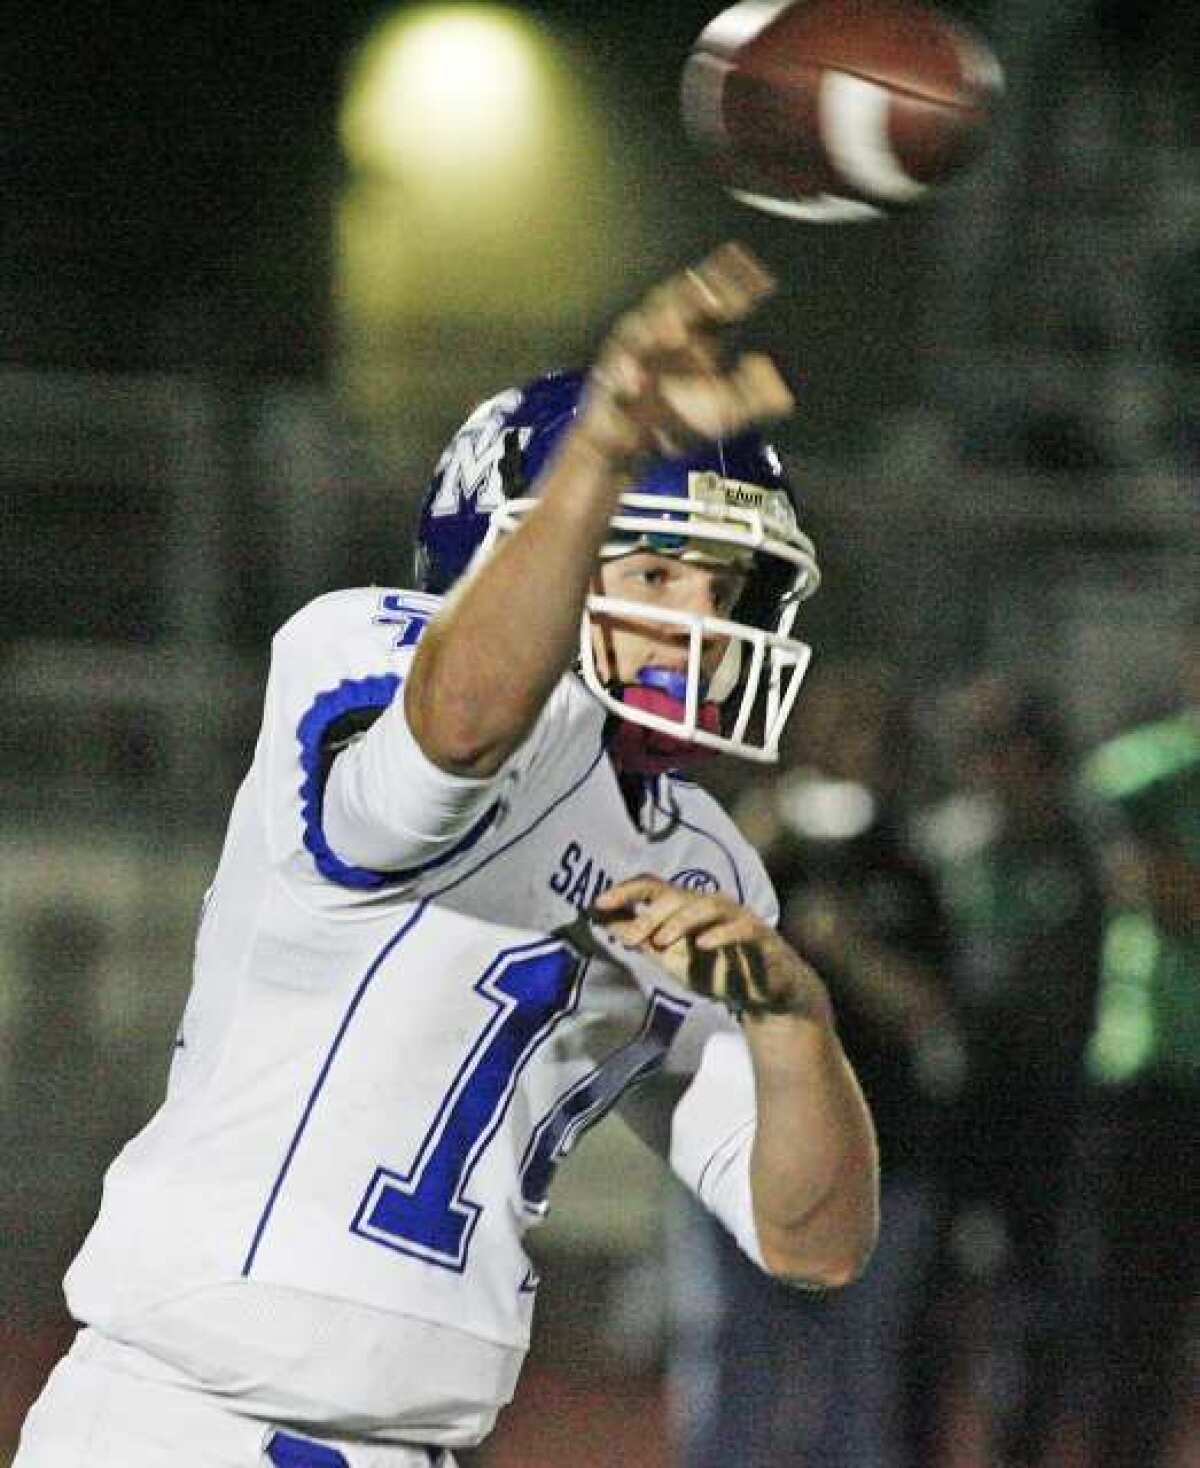 San Marino quarterback Matt Wofford went 12 for 21 for 167 yards and a touchdown in a 21-16 loss to Monrovia.